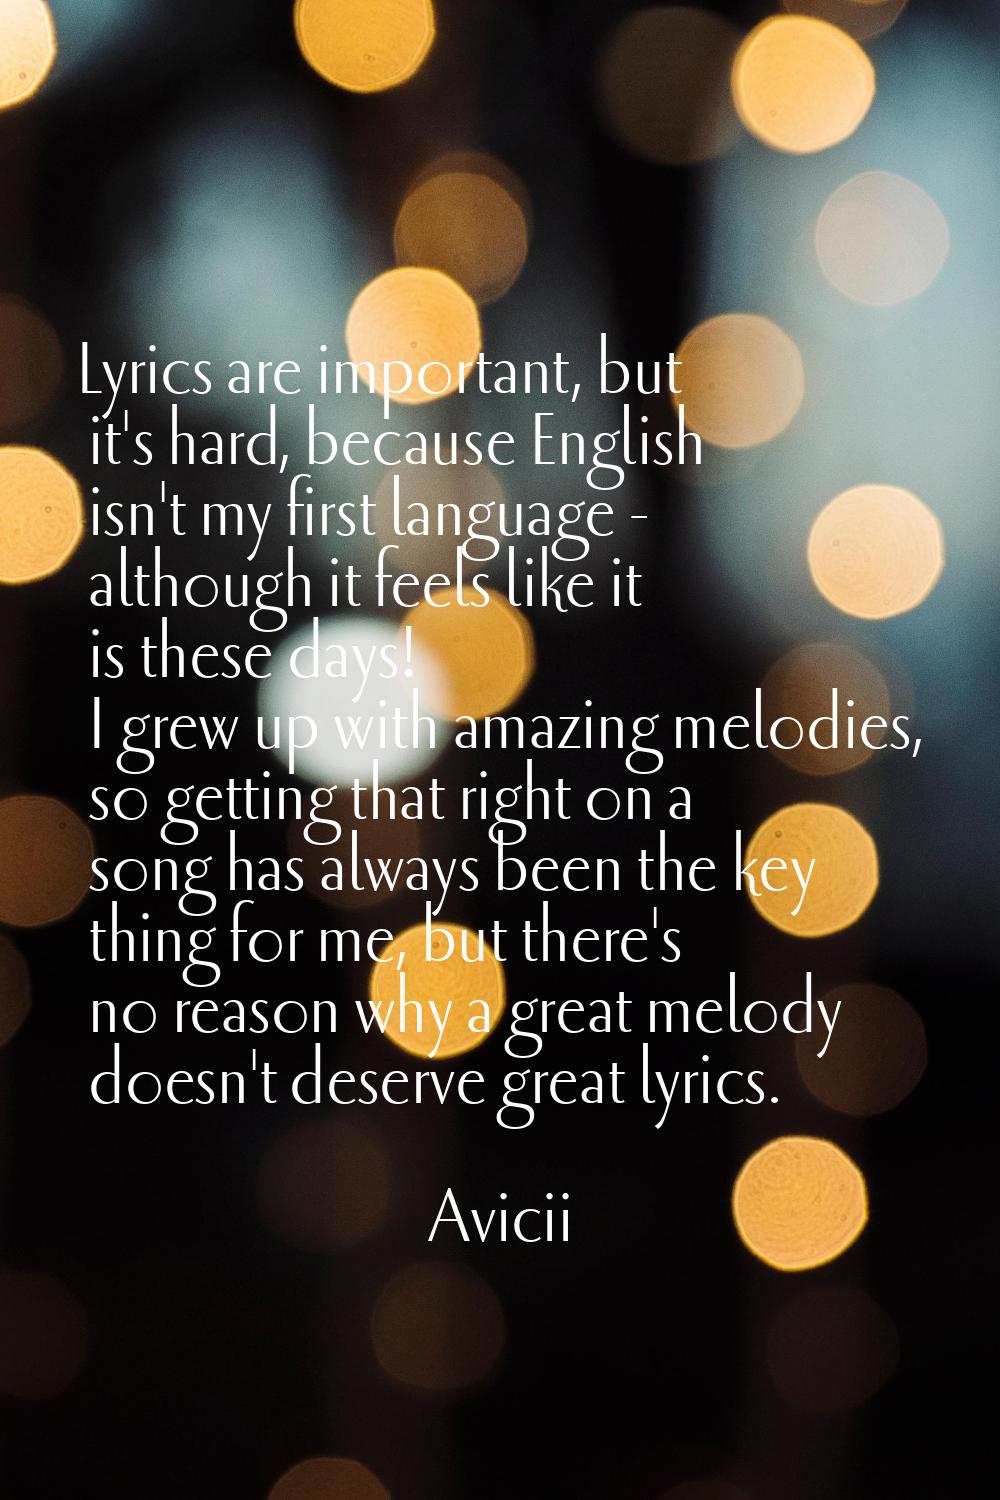 Lyrics are important, but it's hard, because English isn't my first language - although it feels li